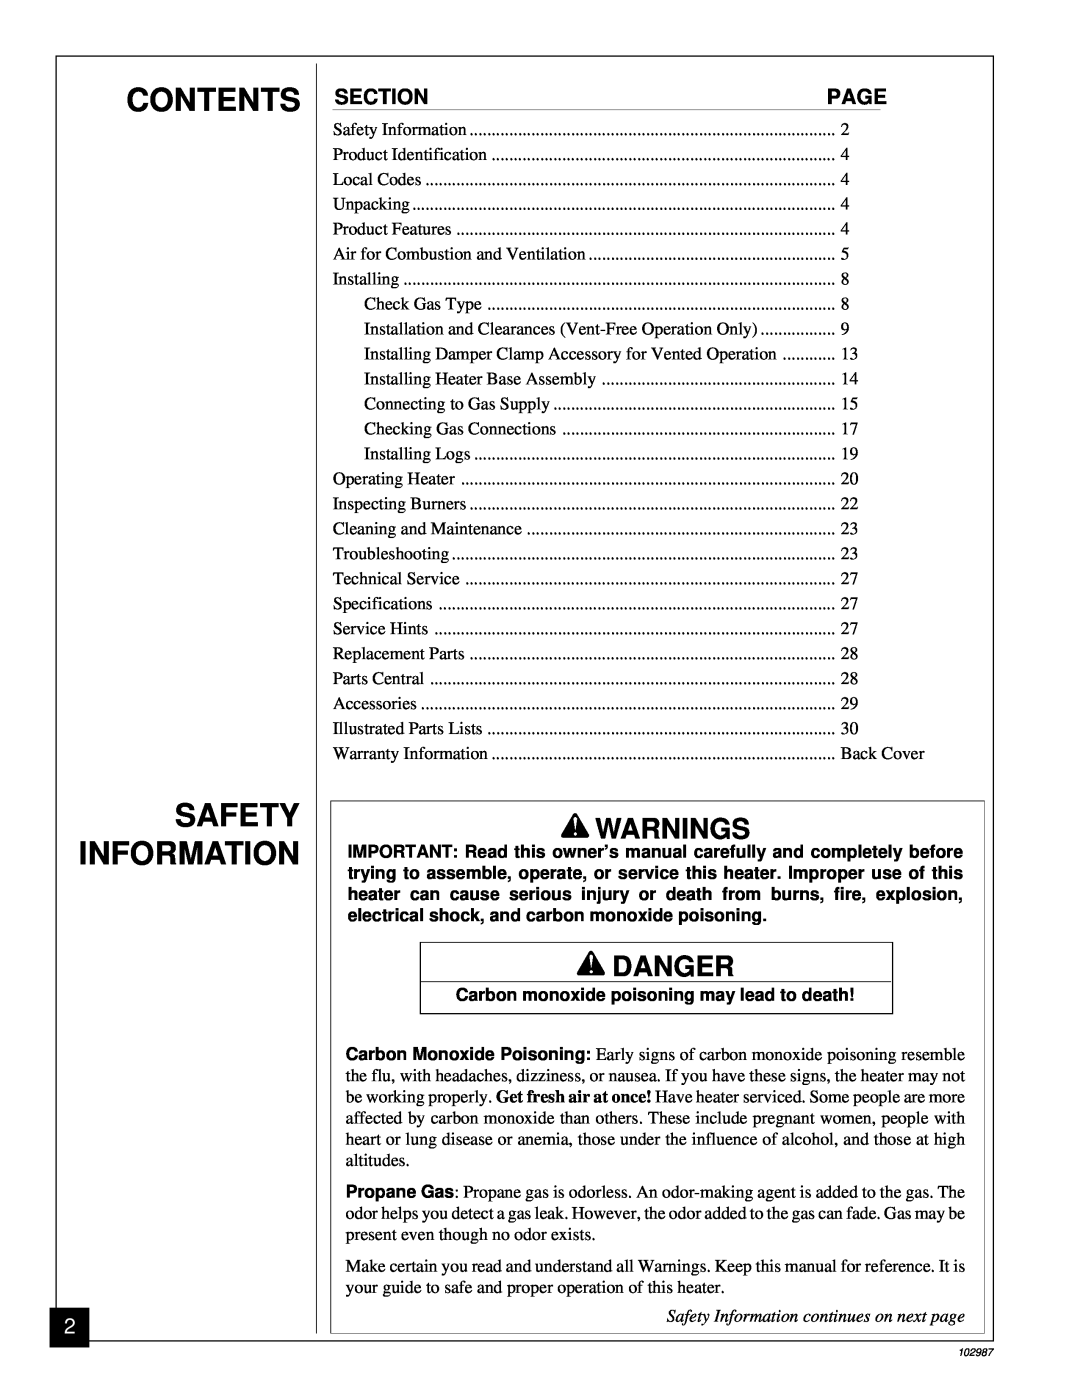 Desa CGD3018P Contents Safety Information, Warnings, Danger, Carbon monoxide poisoning may lead to death 